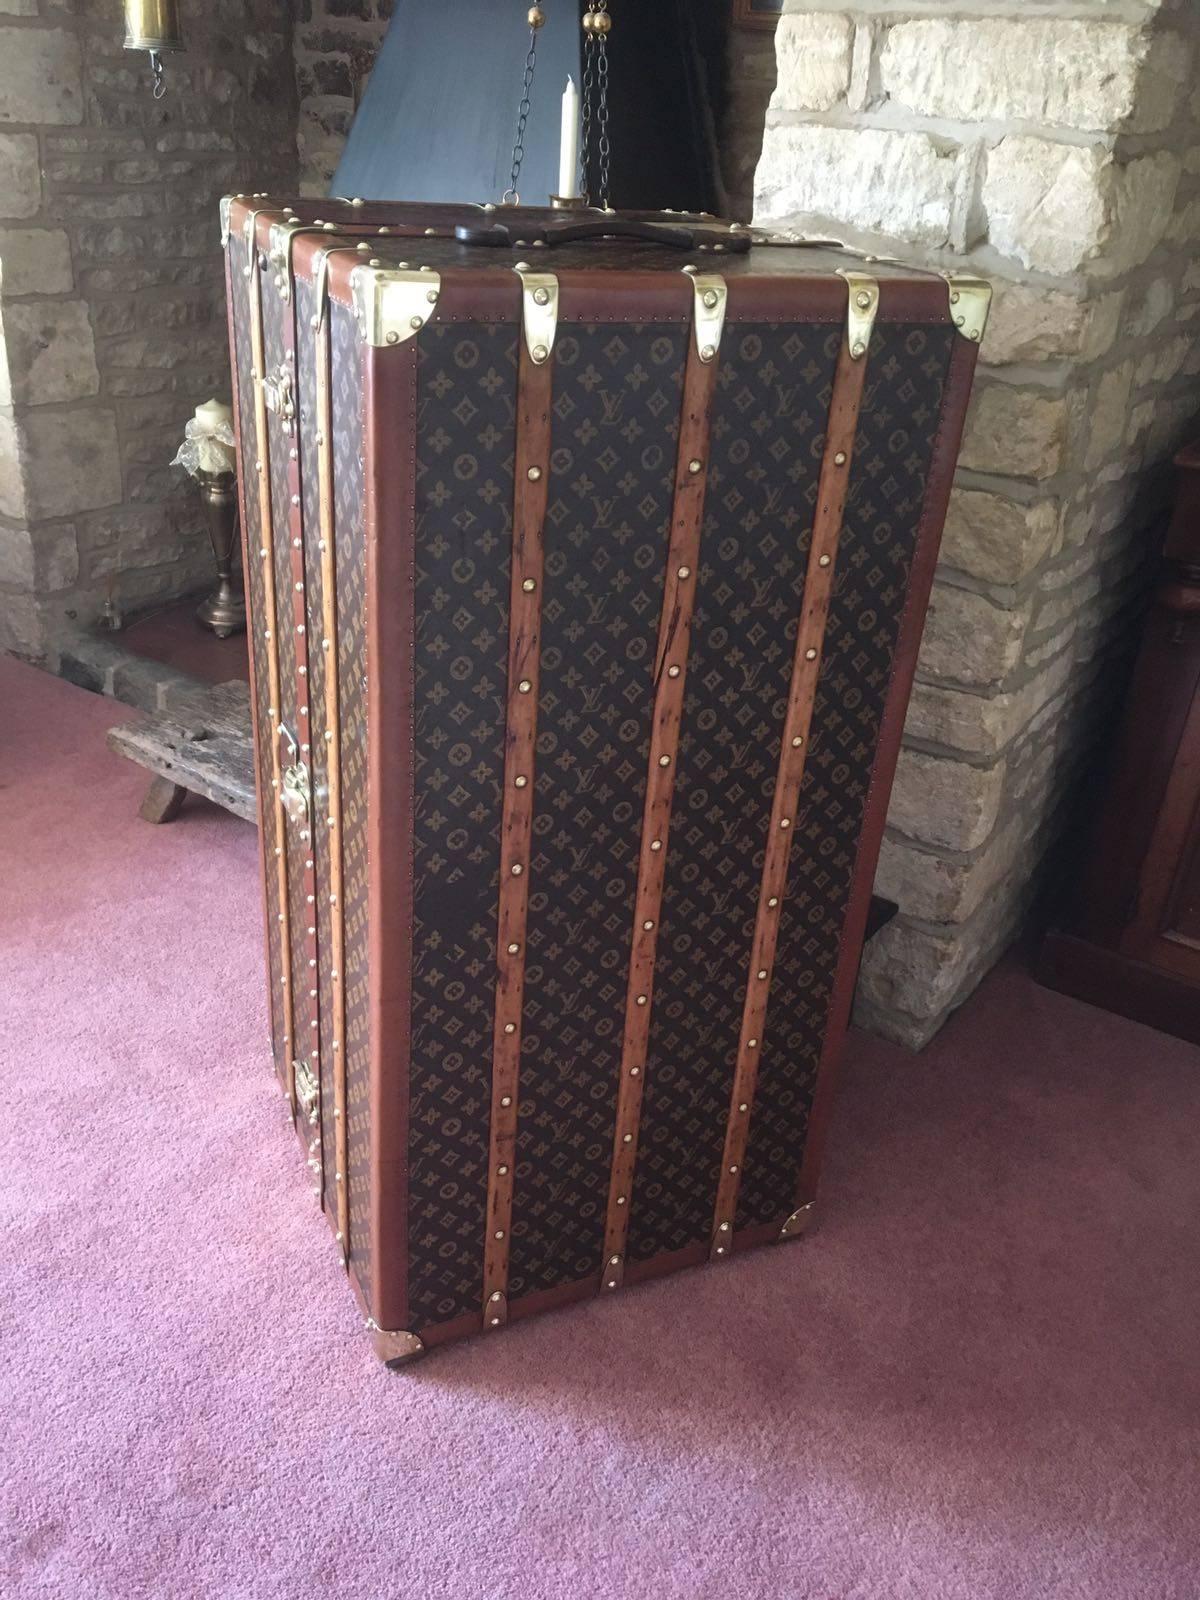 For sale a Louis Vuitton double wardrobe finished in monogram canvas believed to be owned by Qatar's founder - Sheikh Jassim bin Mohammed Al Thani from the famous Al Thani family, as it has his name written in Arabic on both sides 

The trunk is in